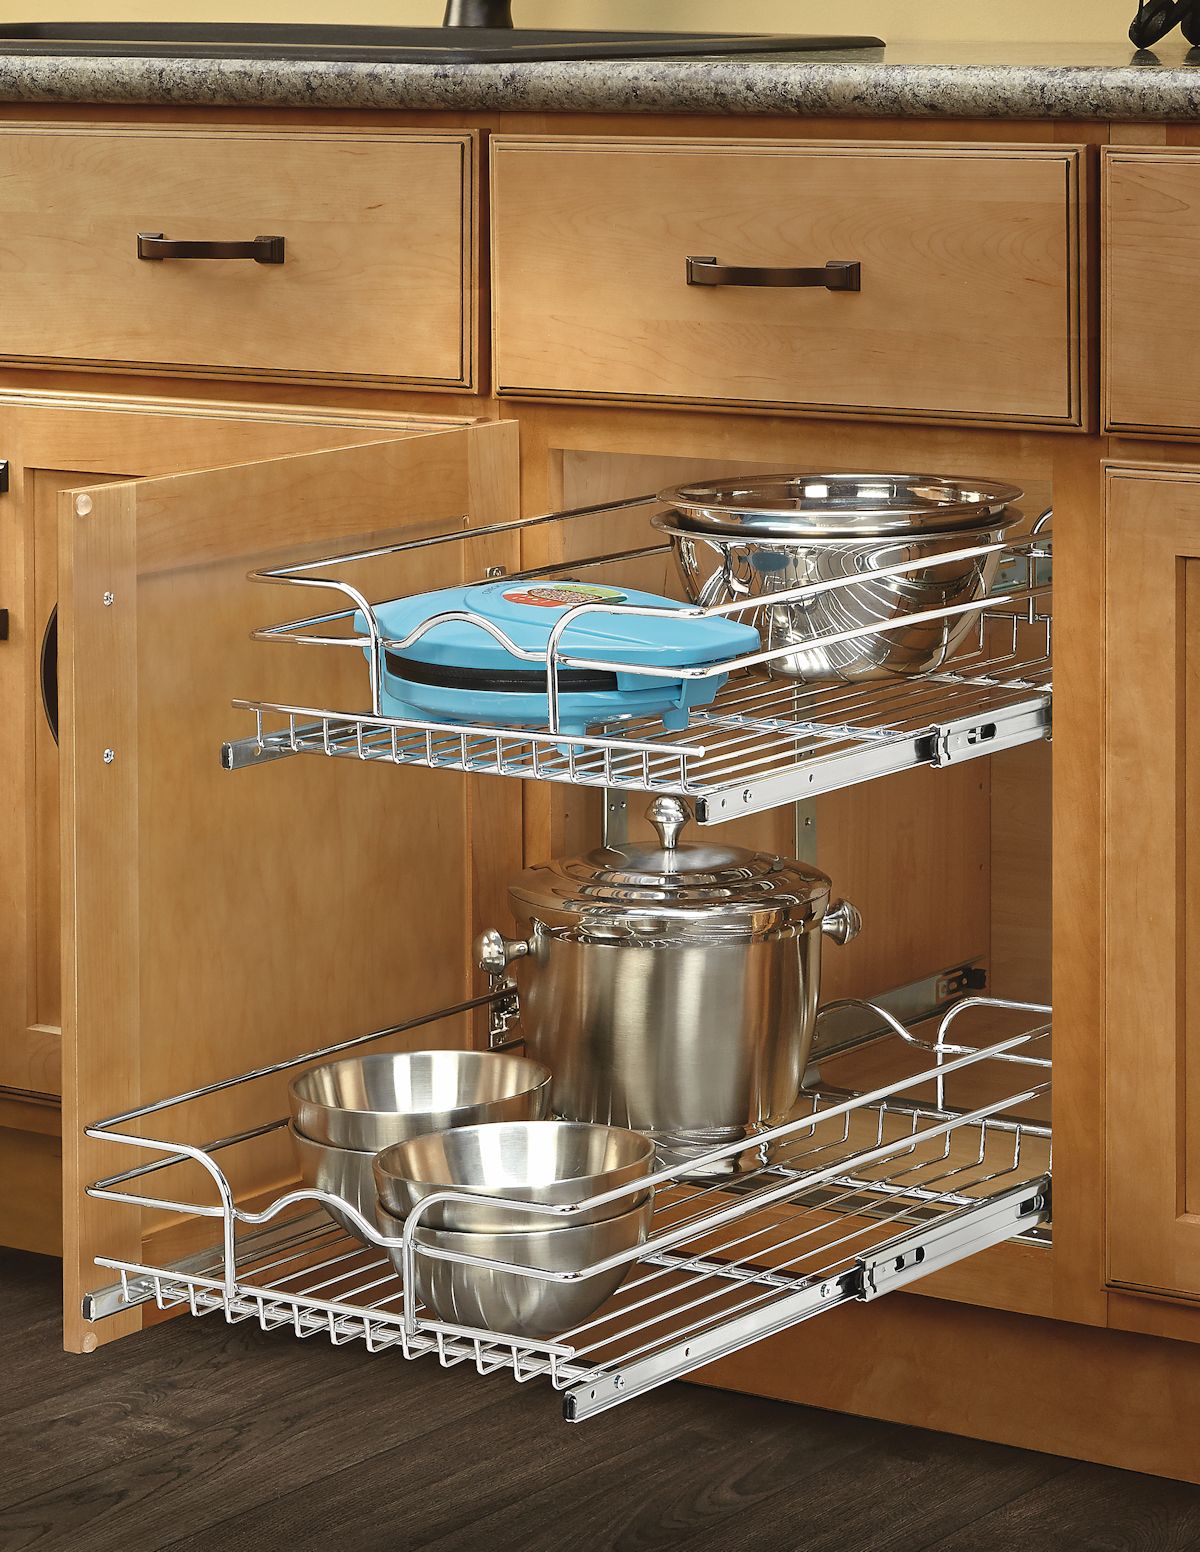 Rev-a-shelf 2-tier Kitchen Cabinet Pull Out Shelf And Drawer